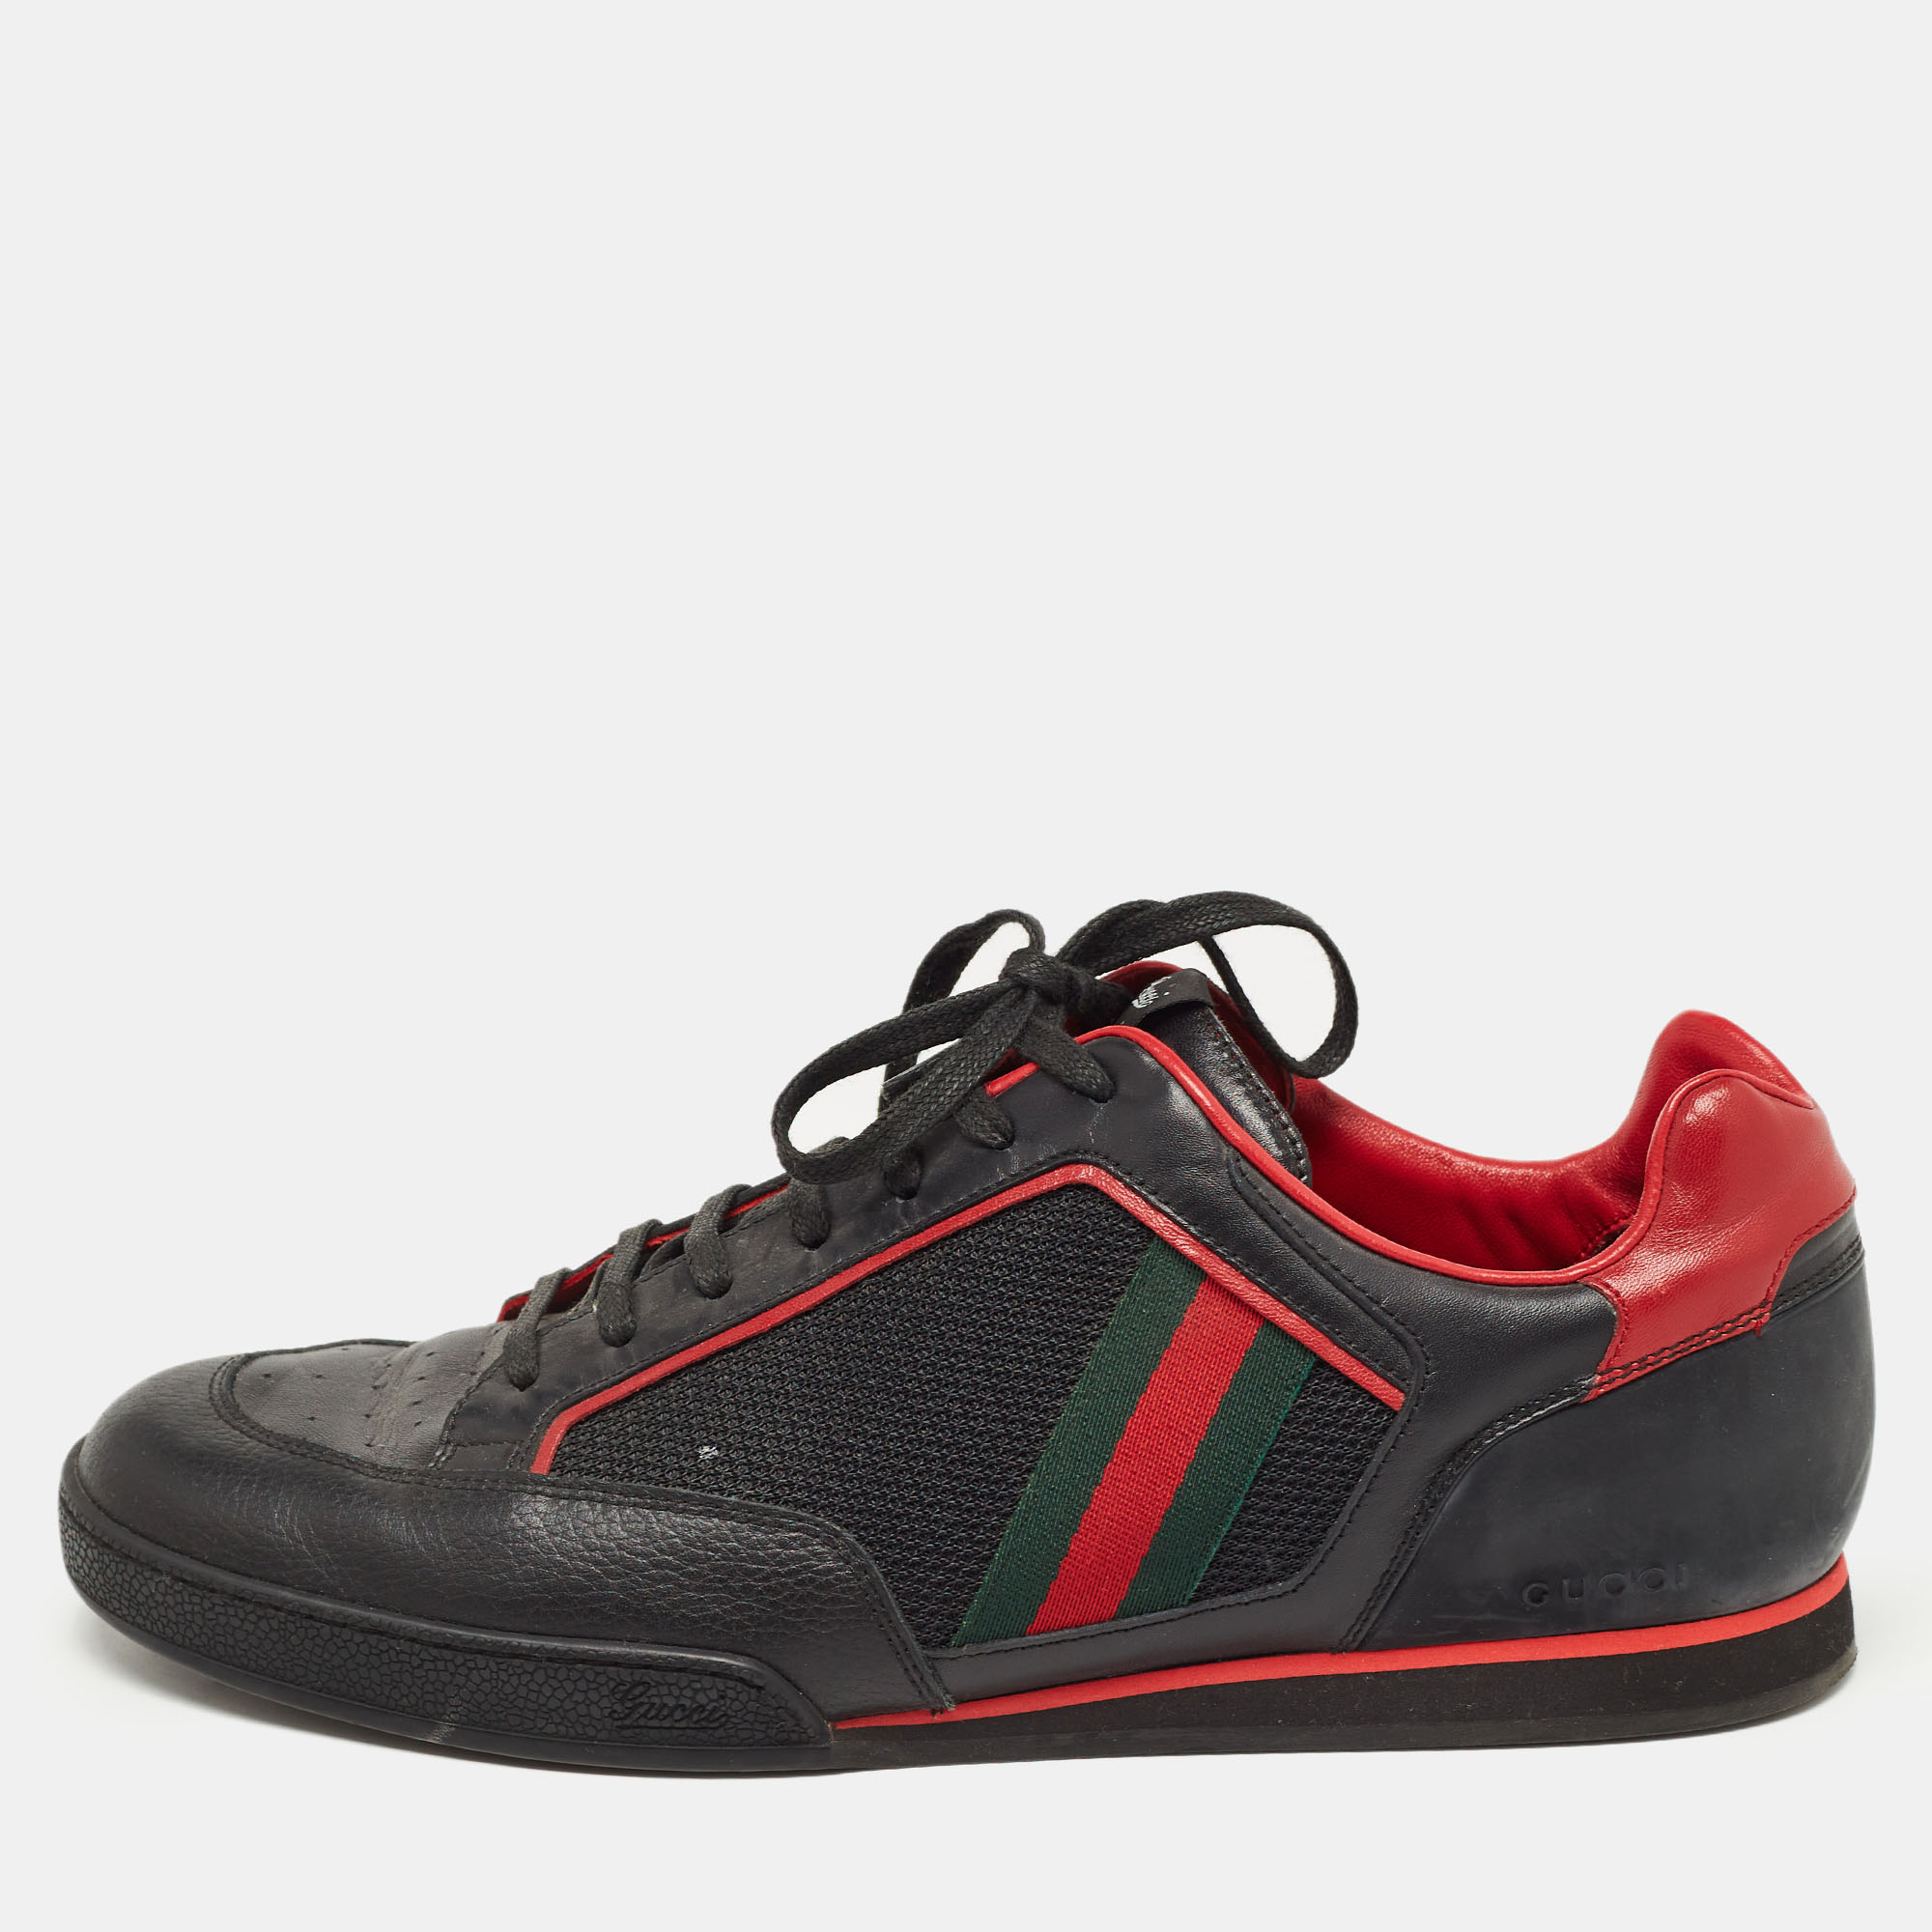 Pre-owned Gucci Black/red Leather And Mesh Vintage Tennis Sneakers Size 43.5